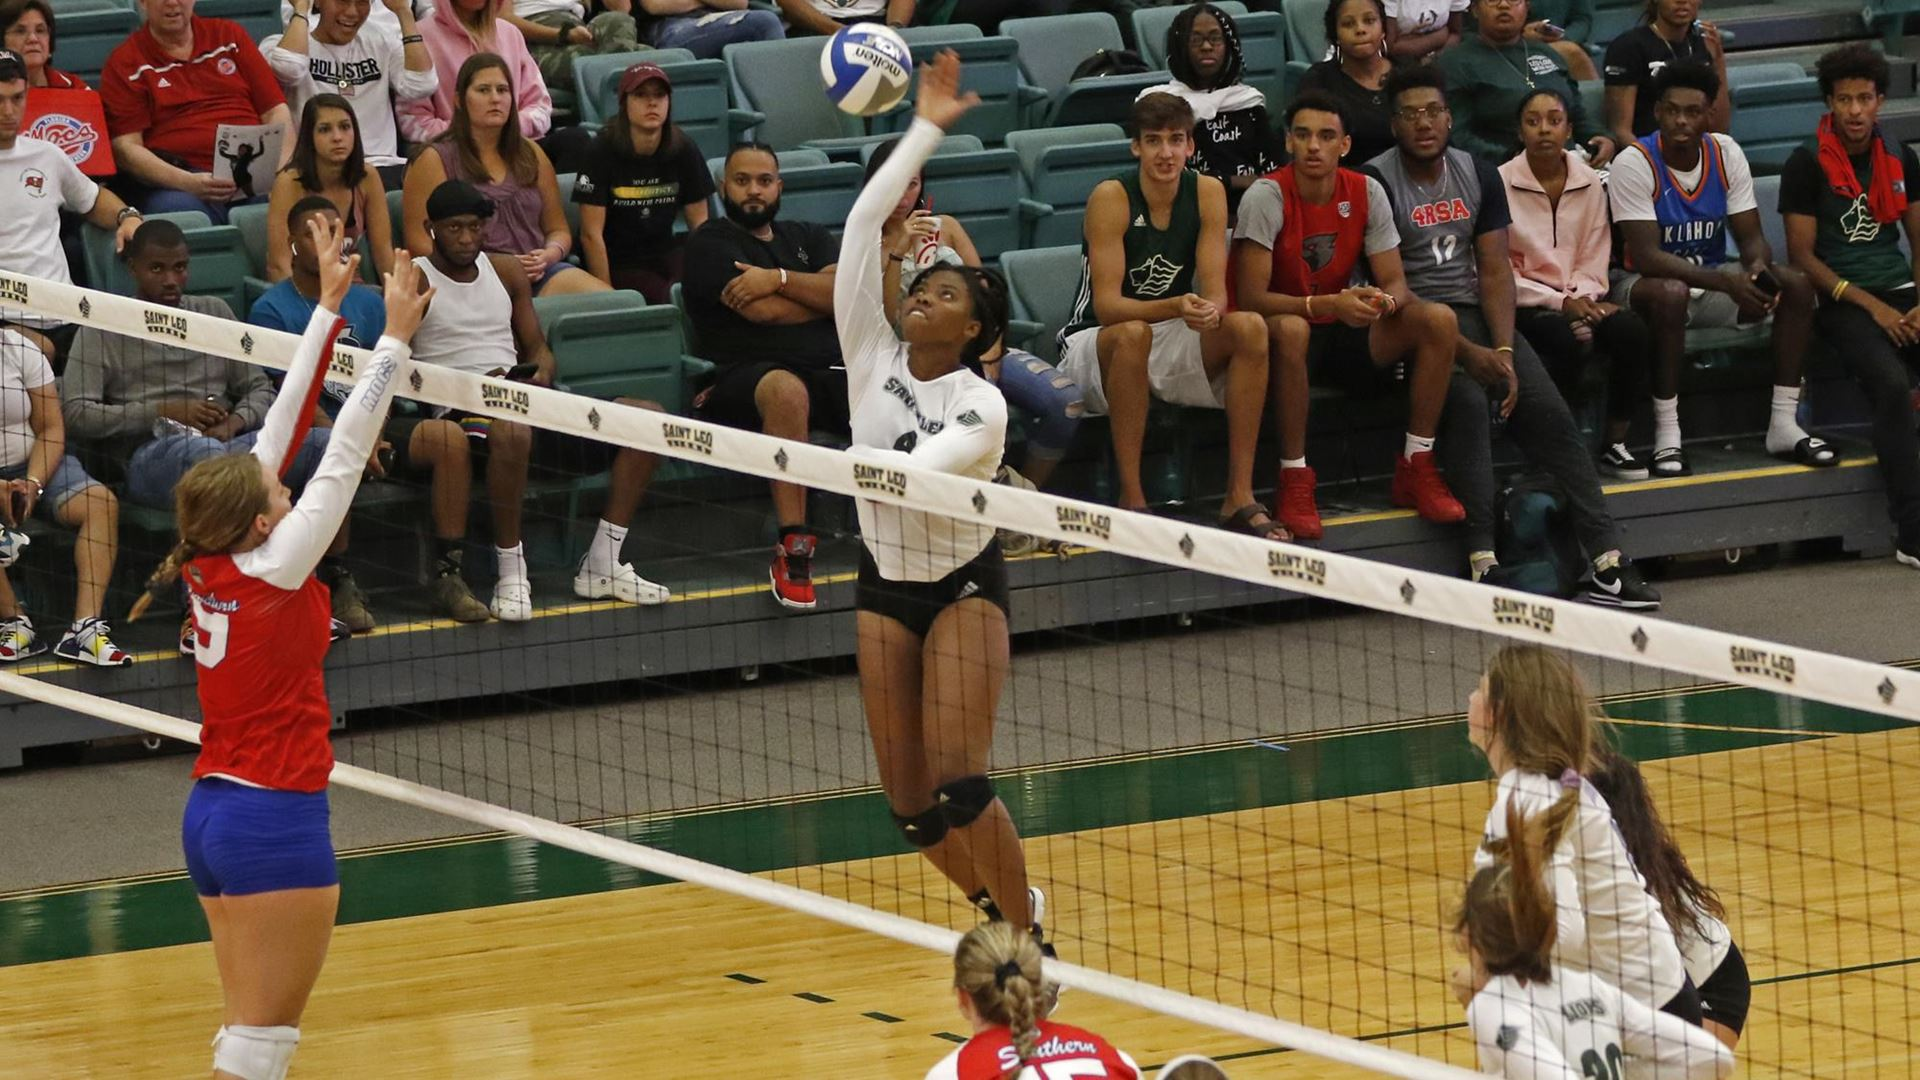 Victoria Omoregie jumping to return volleyball.